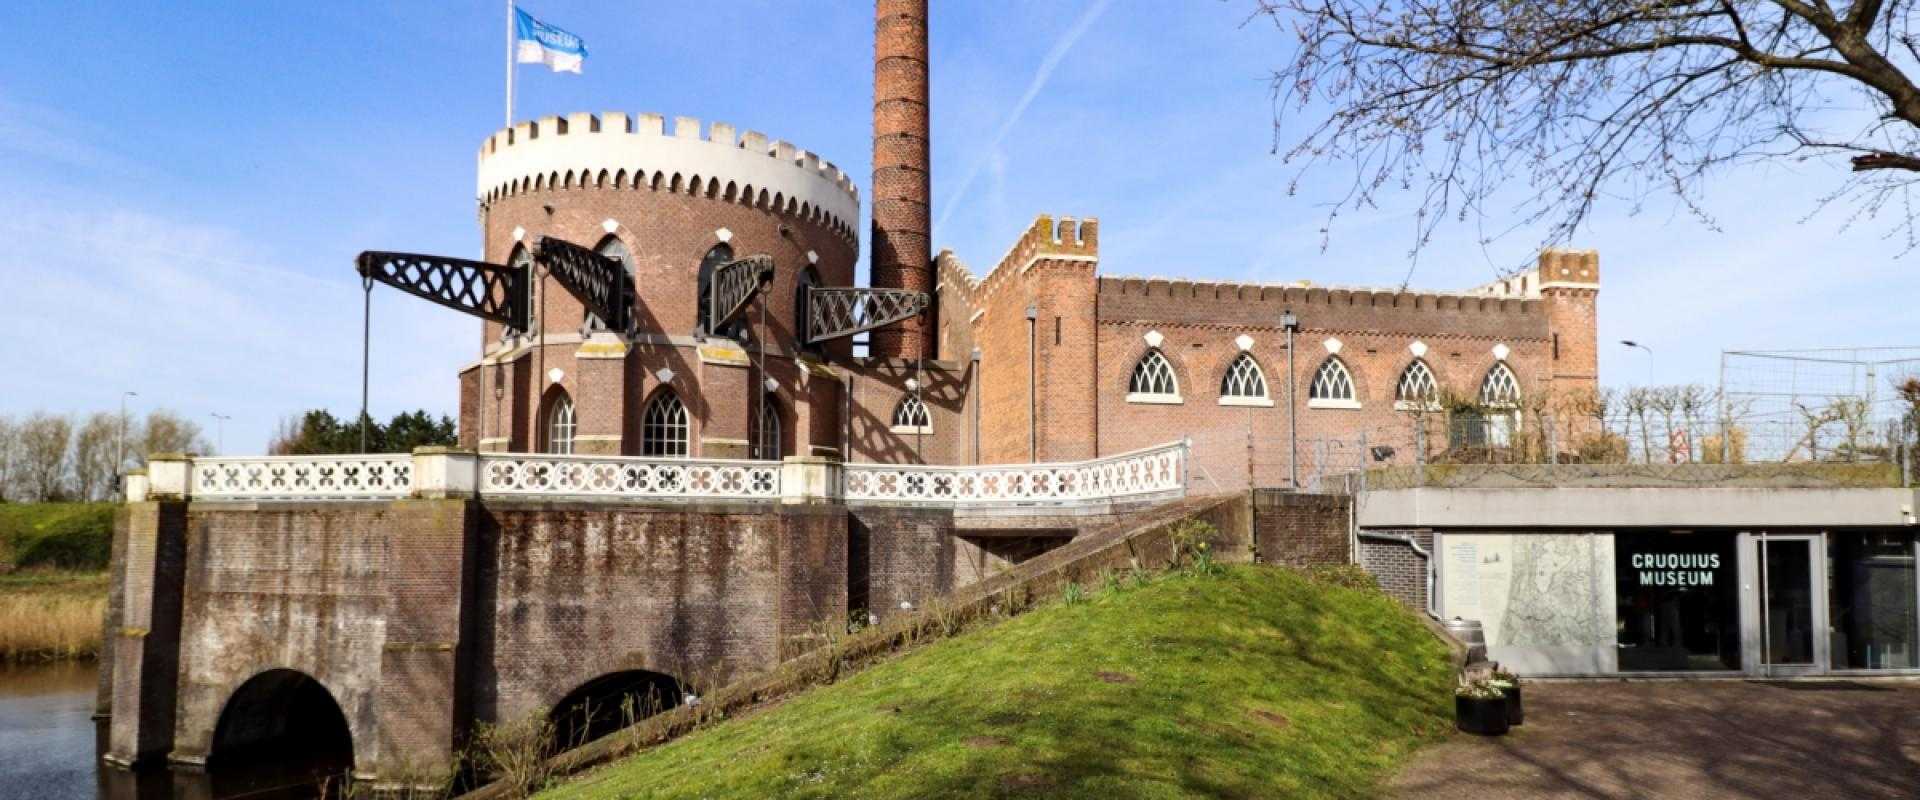 Pumping station de Cruquius seen from the side